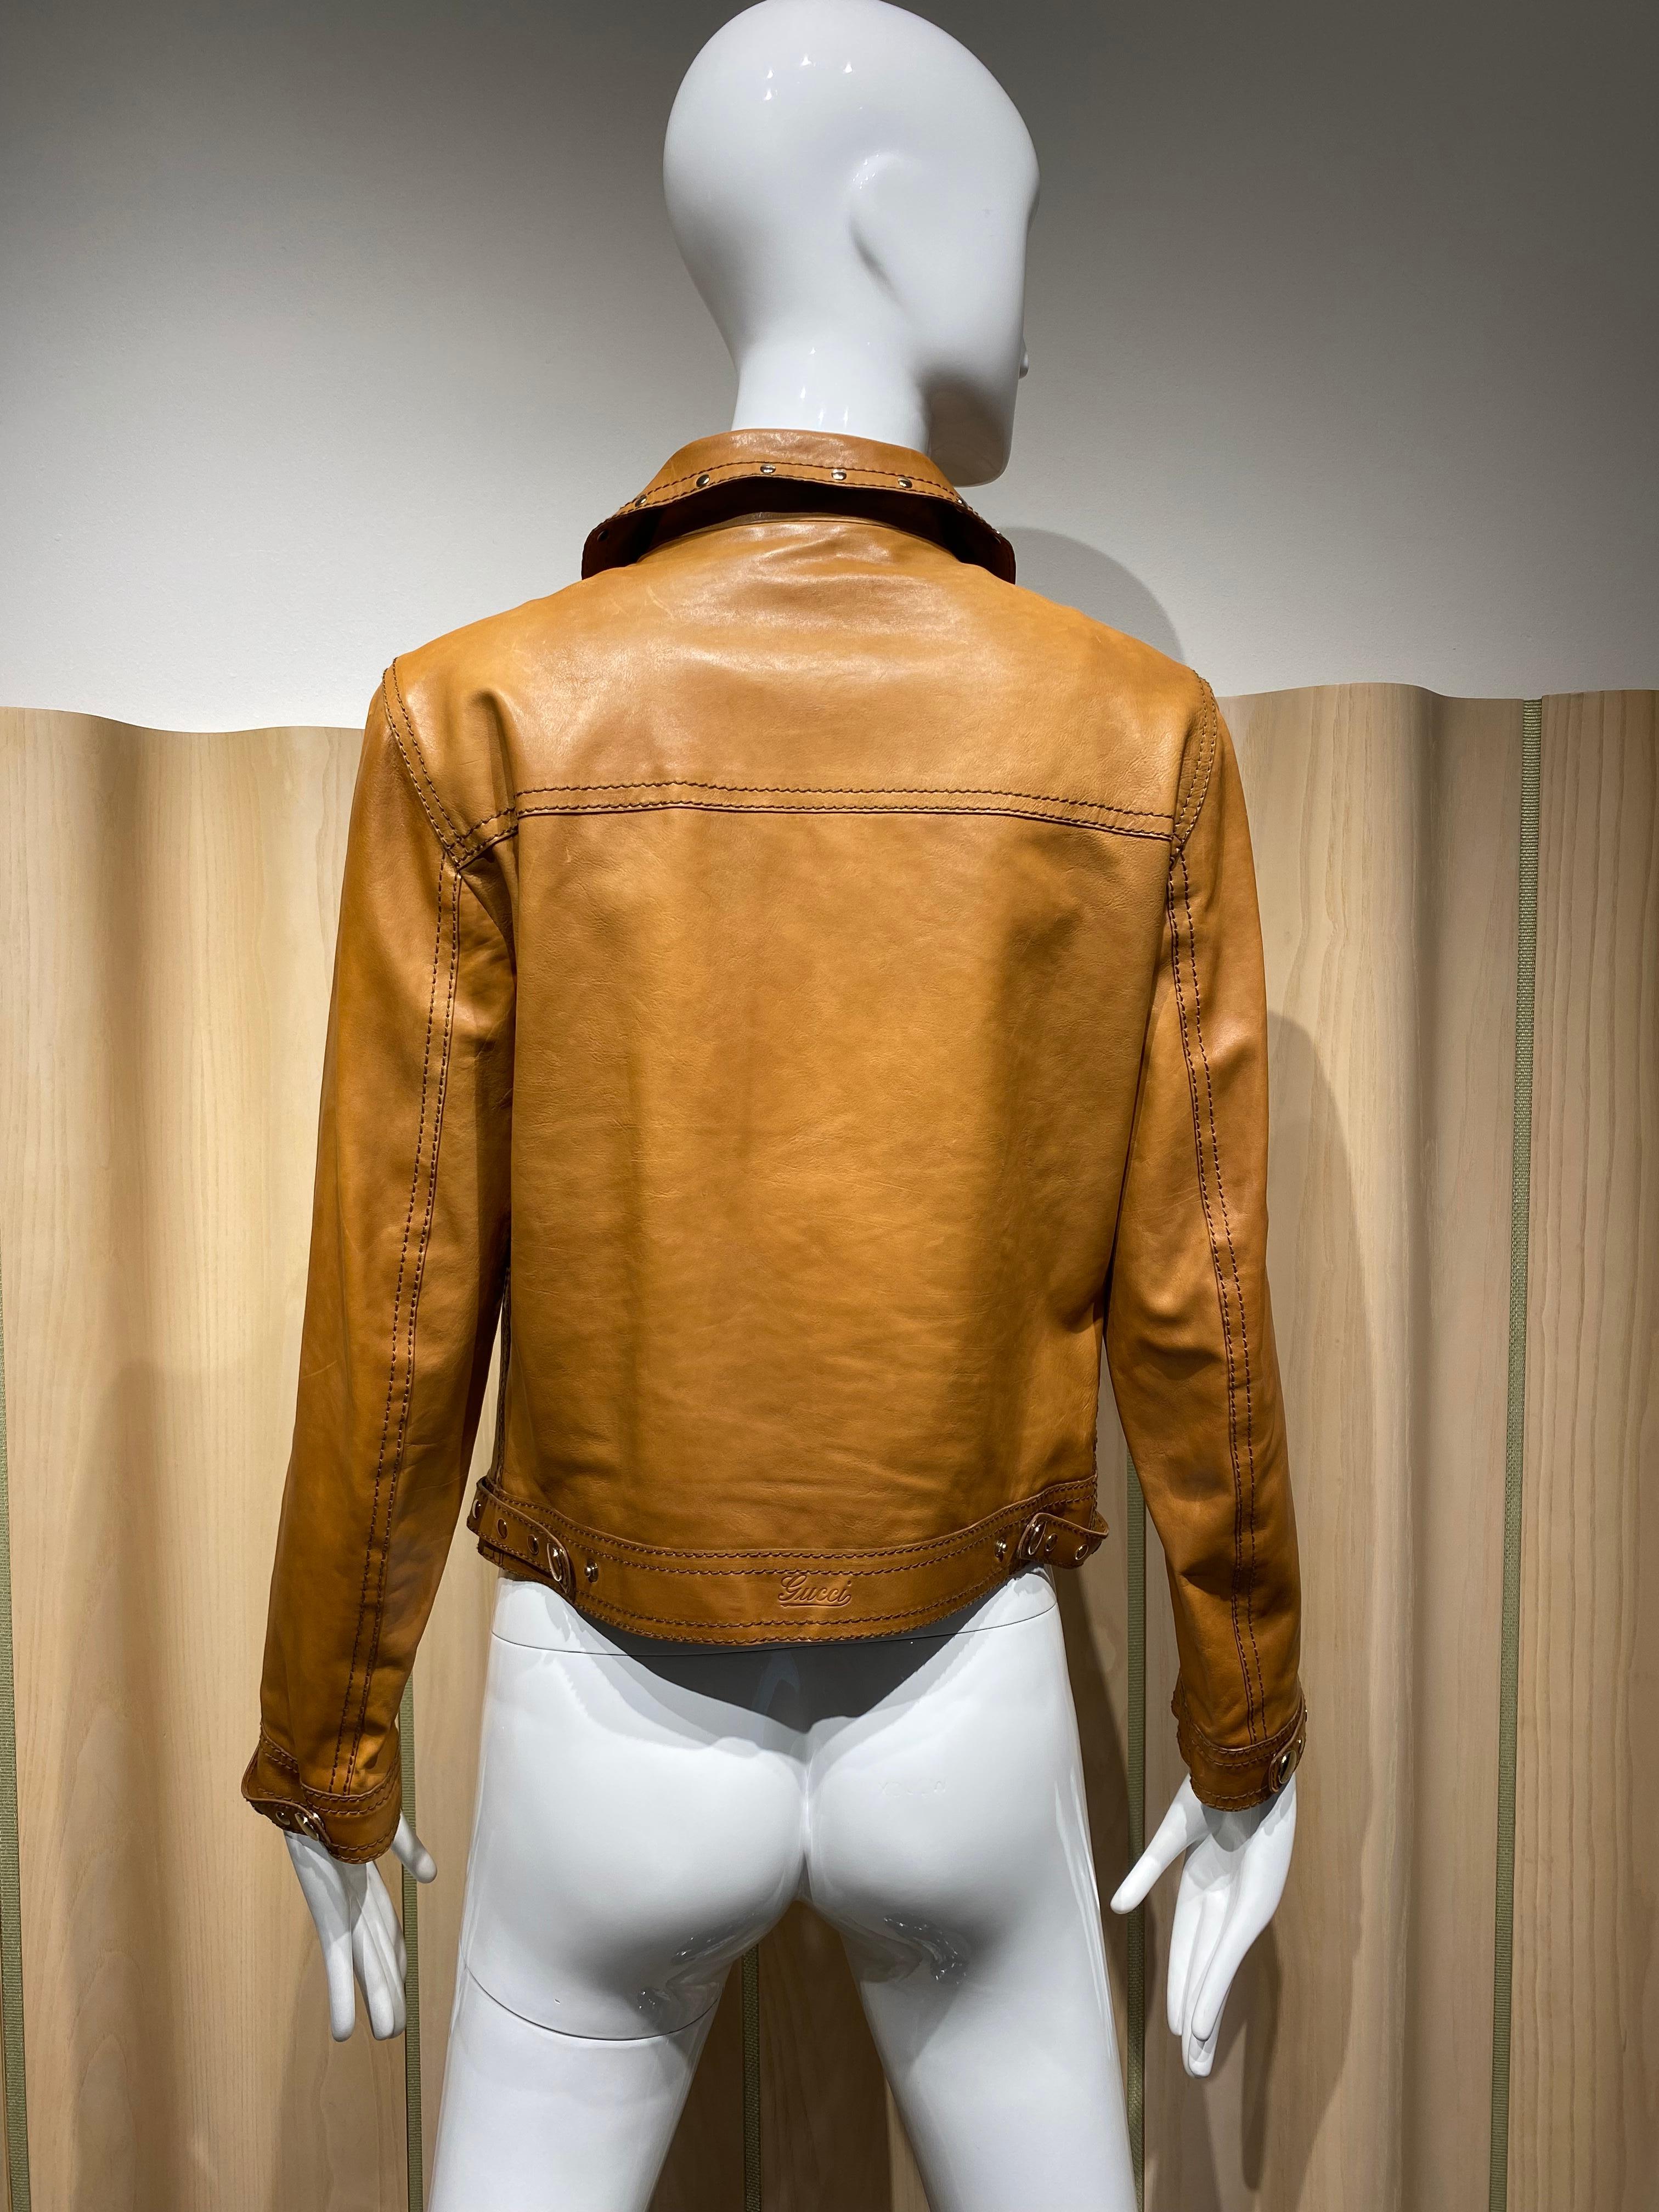 Gucci Tan Leather Jacket lined in Gucci logos. 
Marked size 42 IT
Measurement: Shoulder 16” / Bust 34” / Waist 34” / Hip 34” / Sleeve length: 23”/  Jacket length 19”
